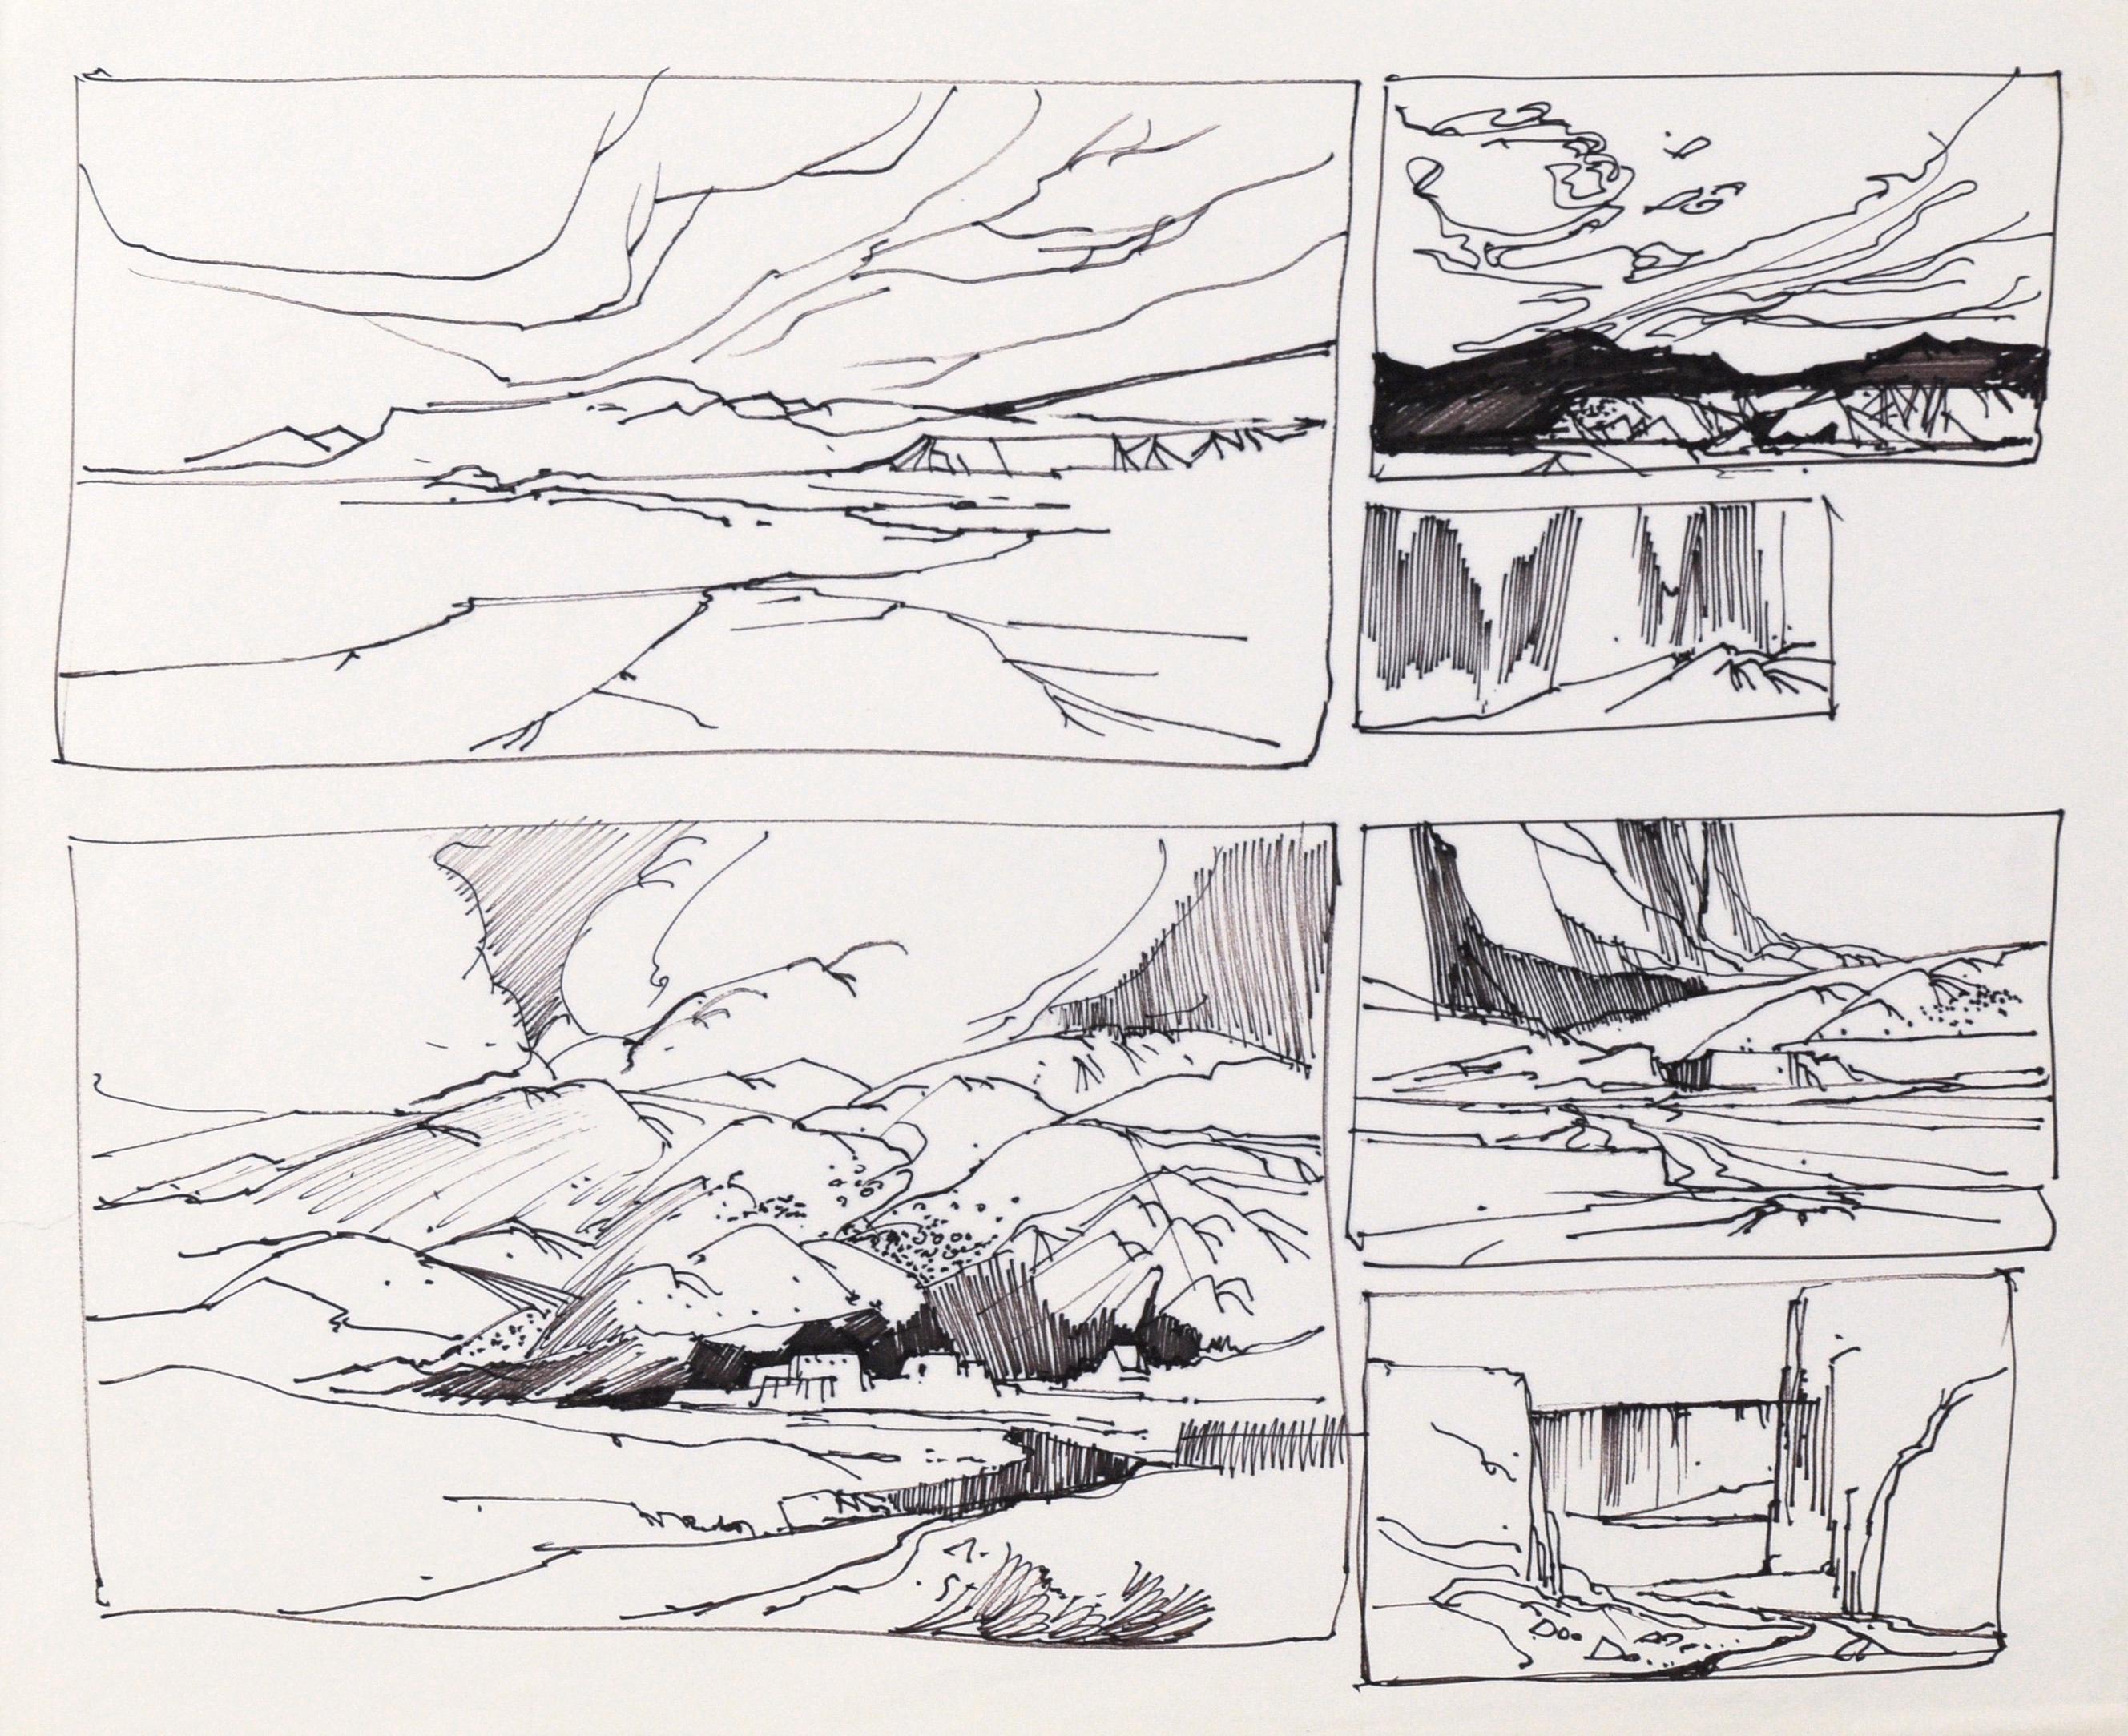 Six Panel Thumbnail Sketches of Desert and Canyon Landscapes in Ink on Paper - Art by Laurence Sisson